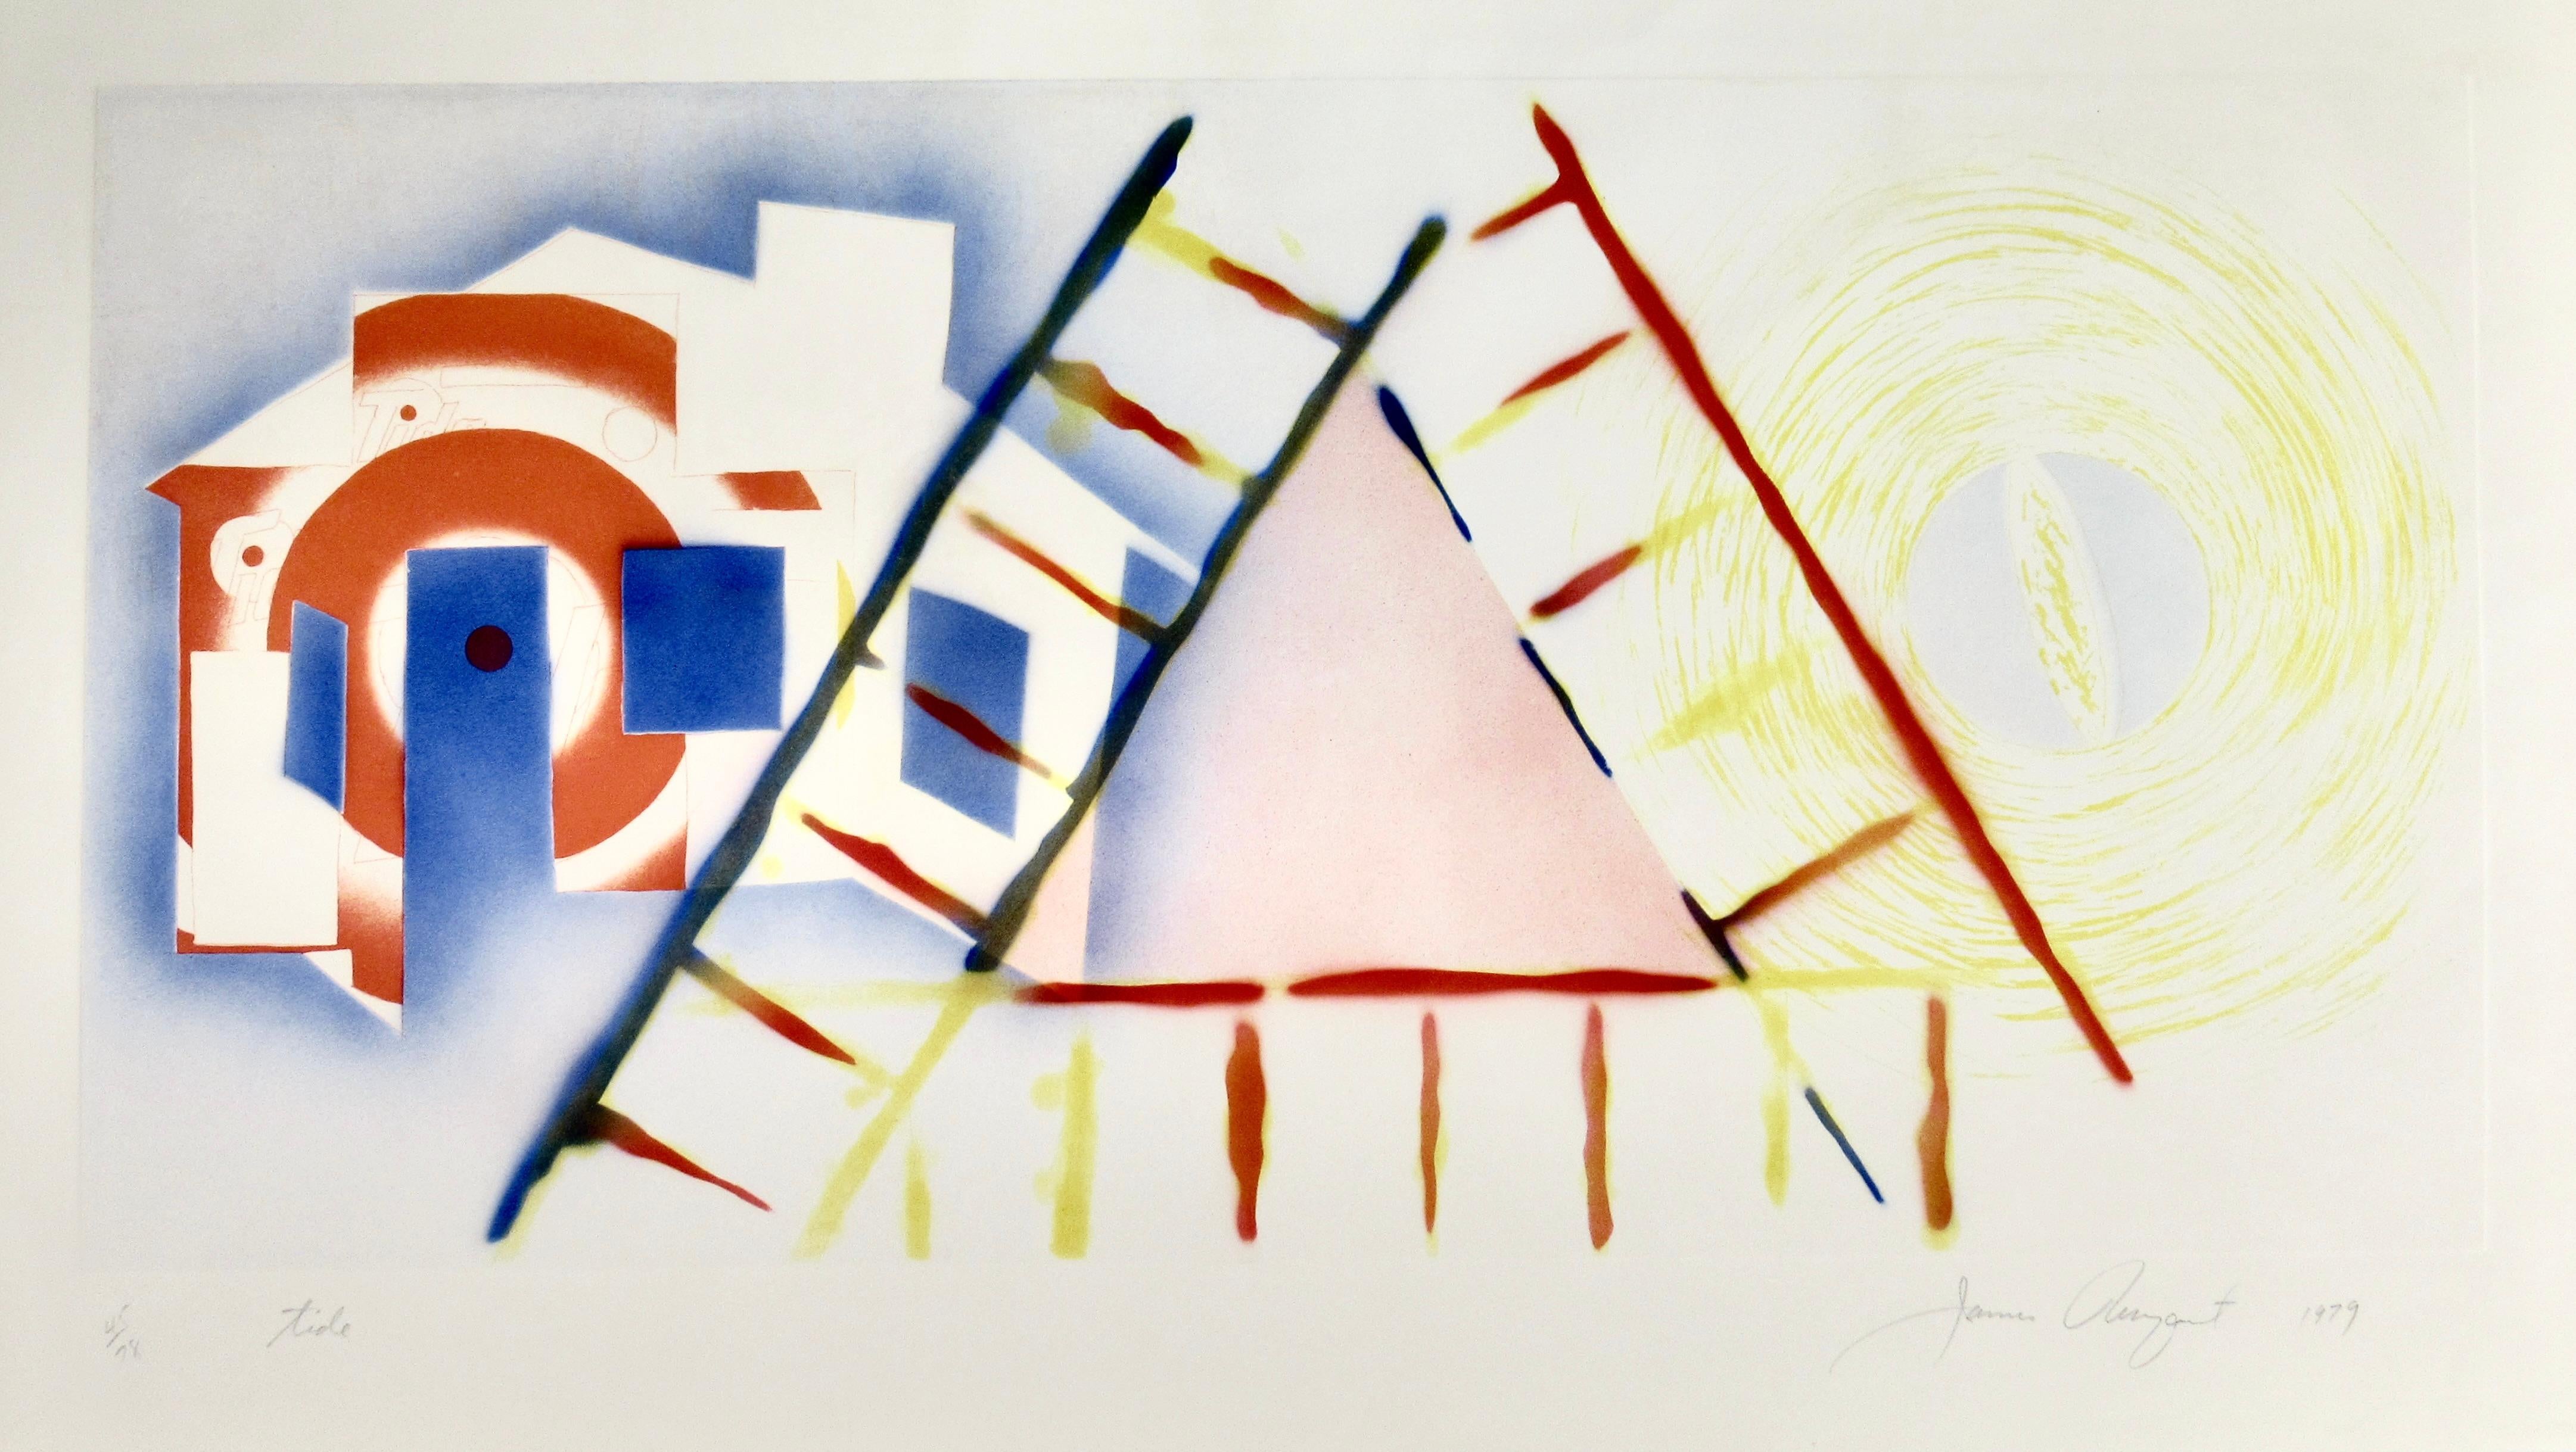 What is James Rosenquist known for?